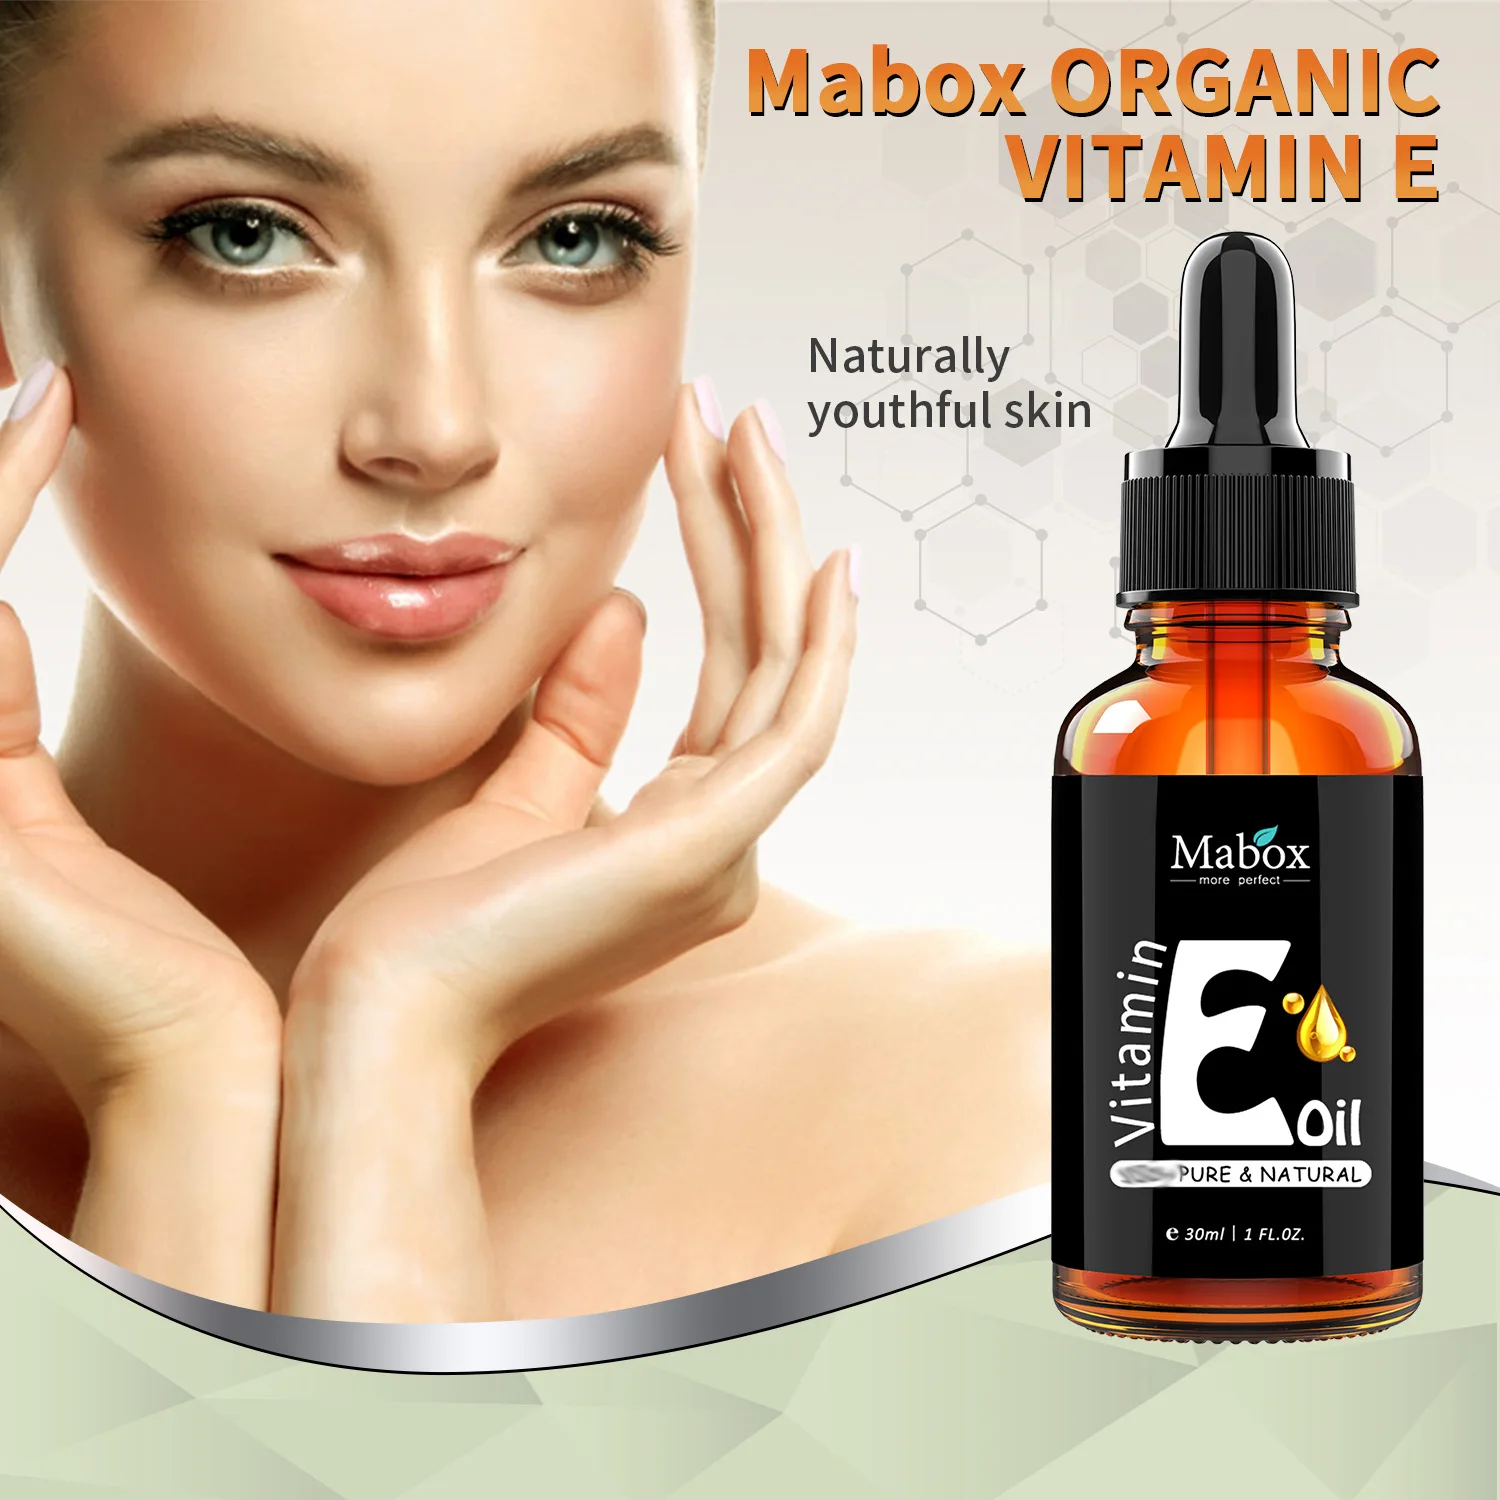 30ml Professional Anti-aging Vitamin E Oil Serum For Whitening Skin Reduces Wrinkles Face Fades Dark Spot and Circles Under Eye